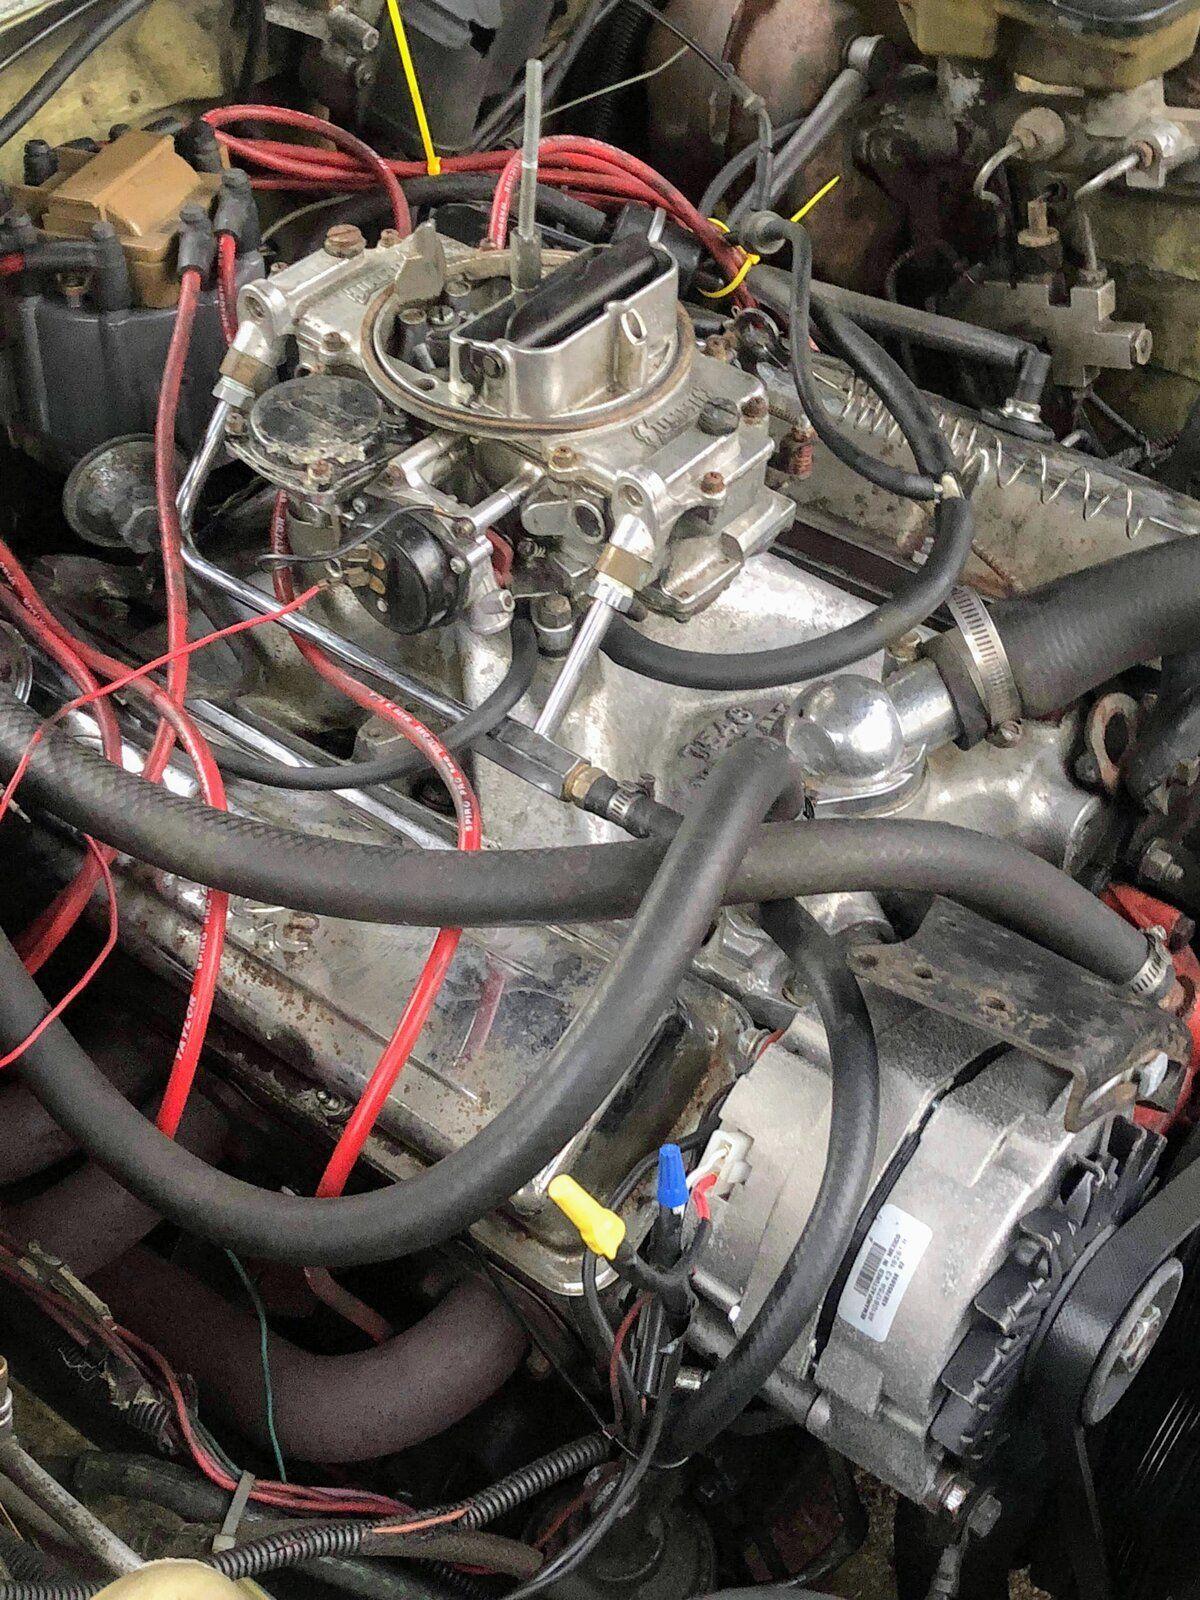 1986 Chevy Camaro z28 electrical issue | Camaro Forums at Z28.com